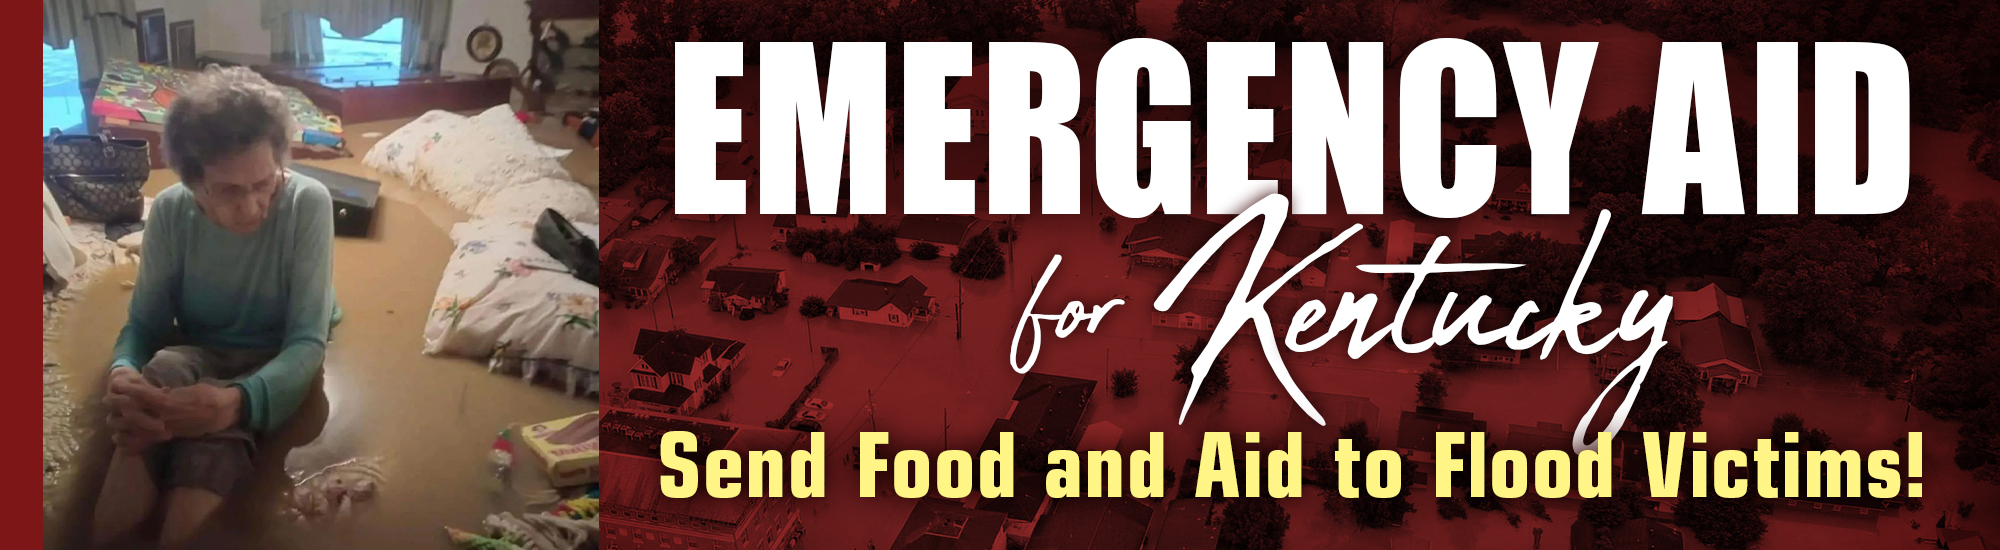 Emergency Aid for Kentucky Send Food and Aid to Flood Victims!